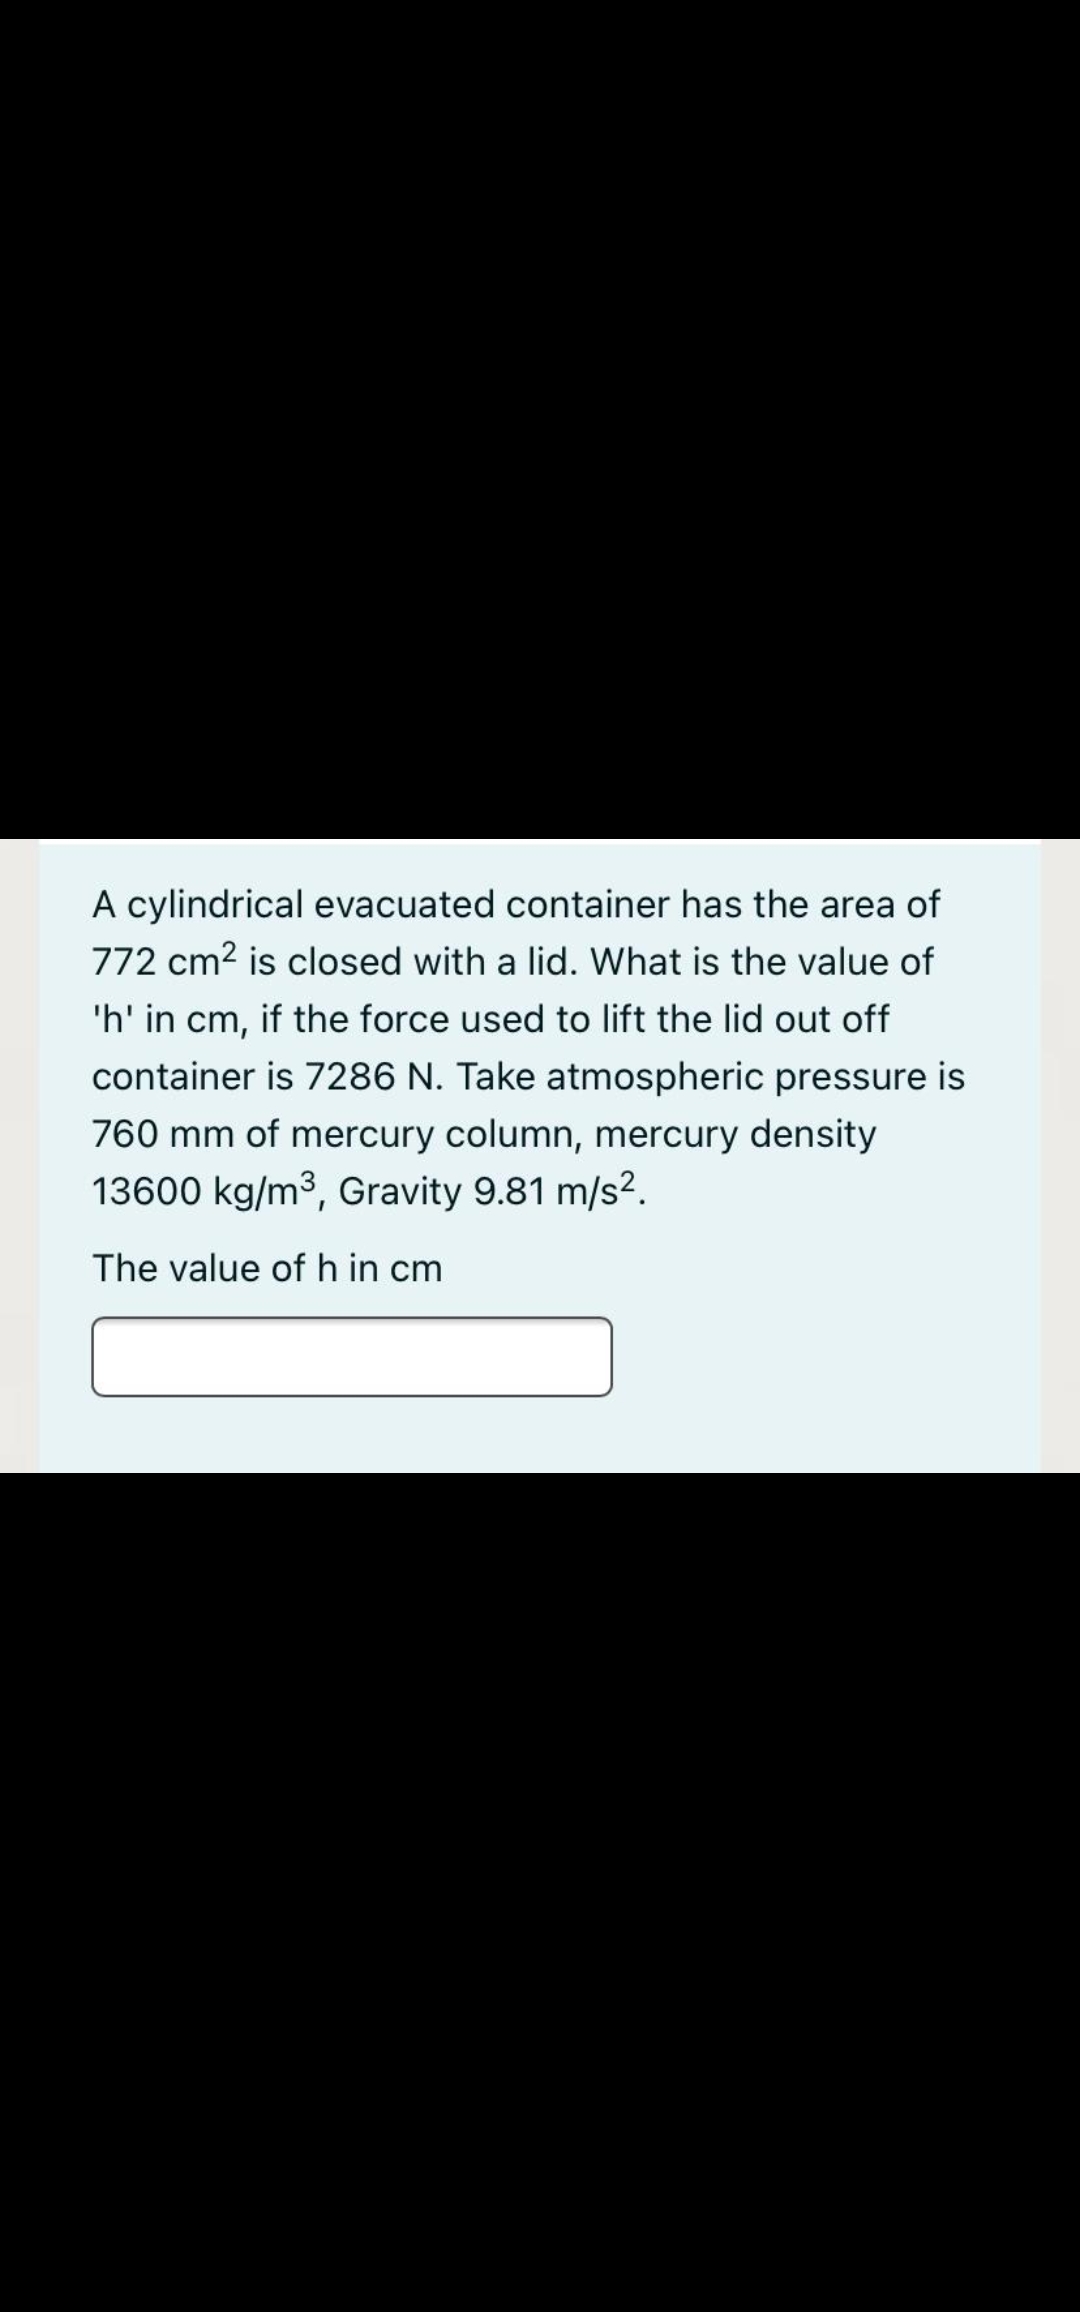 A cylindrical evacuated container has the area of
772 cm2 is closed with a lid. What is the value of
'h' in cm, if the force used to lift the lid out off
container is 7286 N. Take atmospheric pressure is
760 mm of mercury column, mercury density
13600 kg/m3, Gravity 9.81 m/s2.
The value of h in cm
